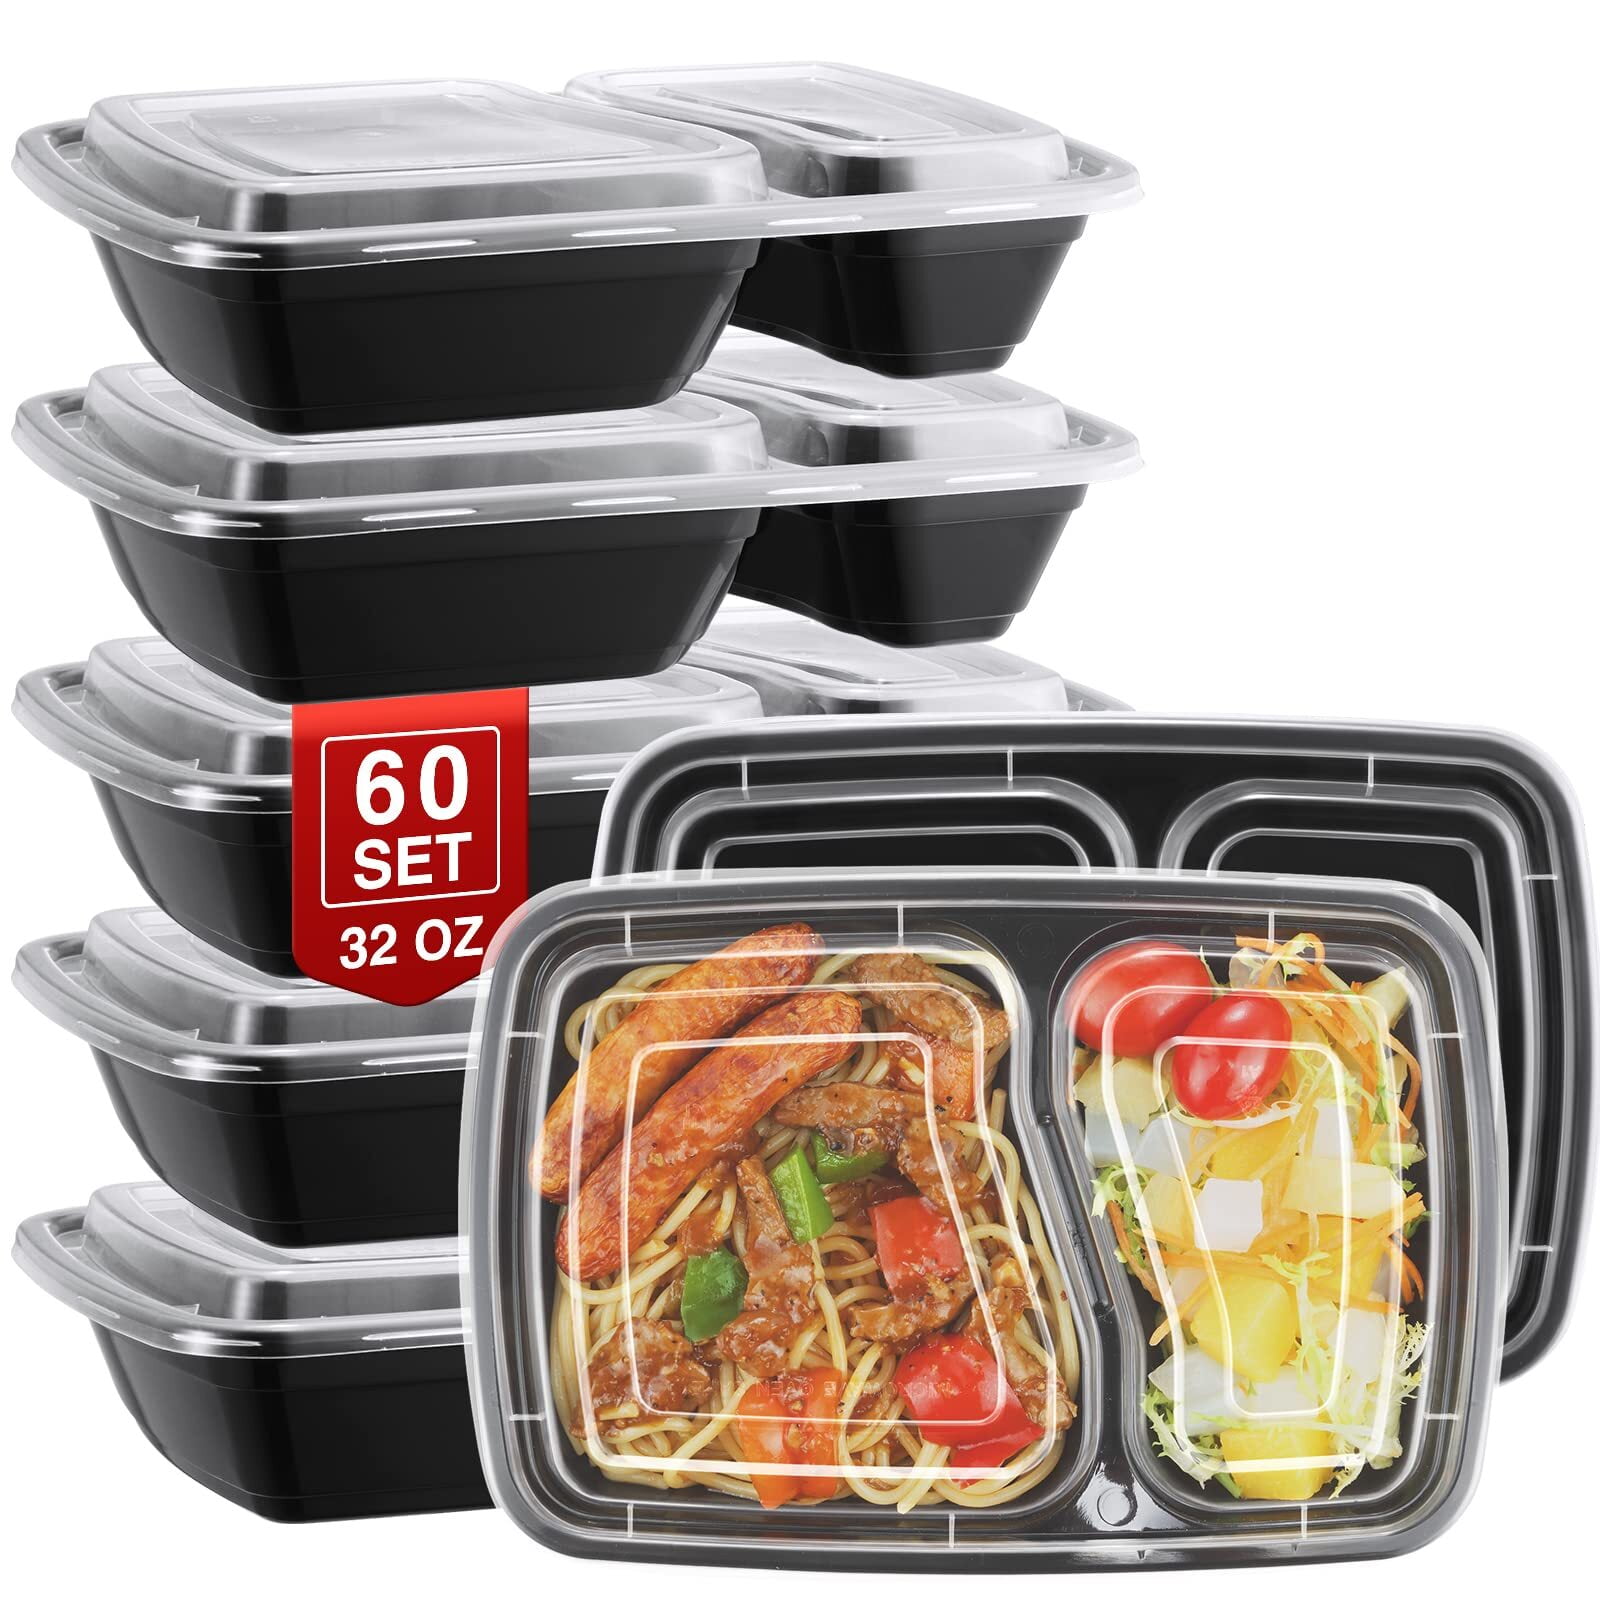 Freshware Meal Prep Containers [15 Pack] 1 Compartment with Lids, Food Storage Bento Box 